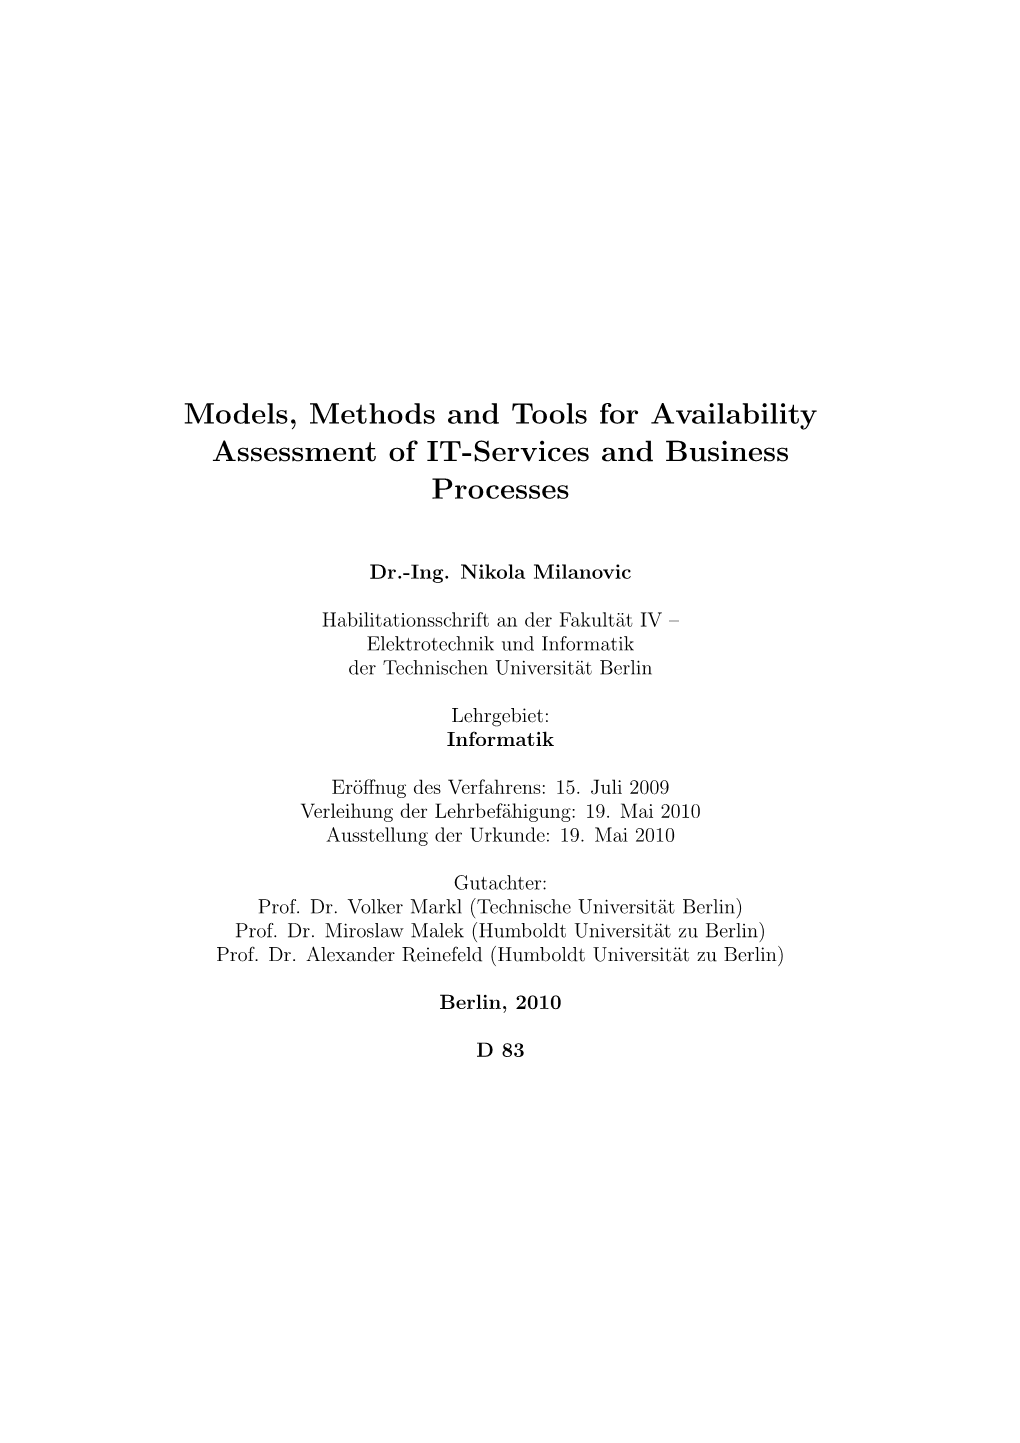 Models, Methods and Tools for Availability Assessment of IT-Services and Business Processes